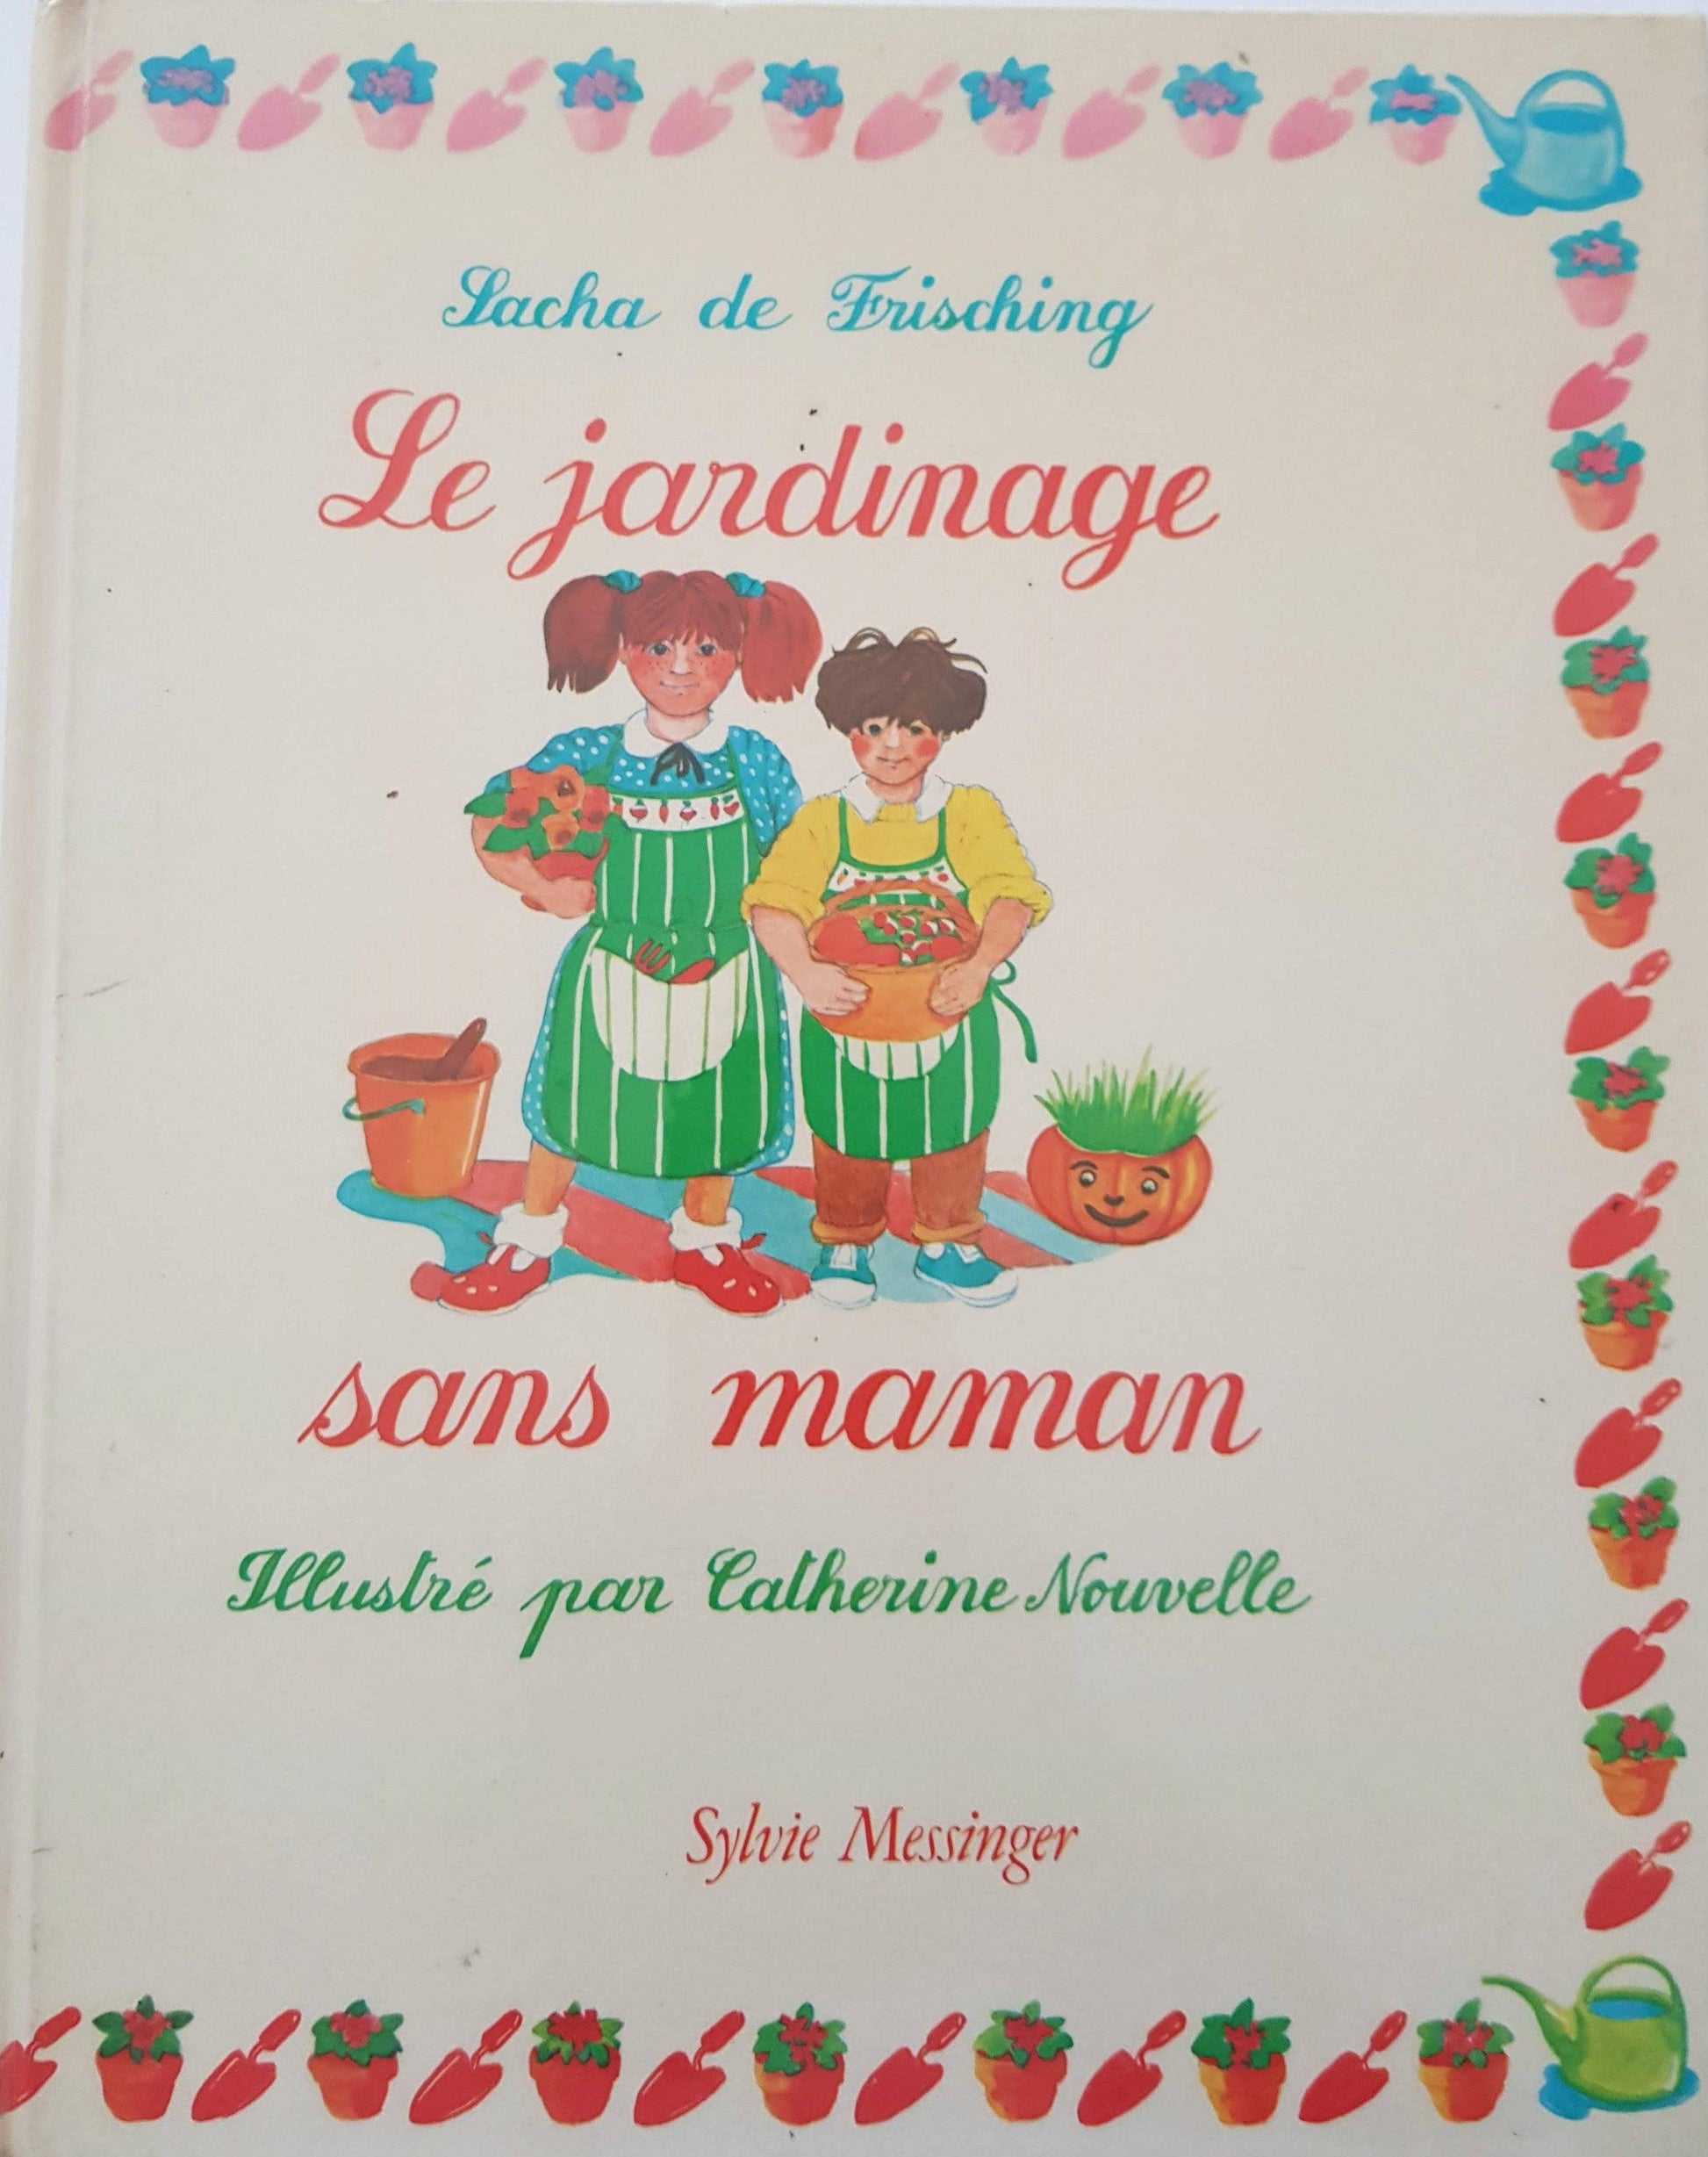 Le jardinage sans mamas by Sylvie messinger Like New Not Applicable  (4593185390647)